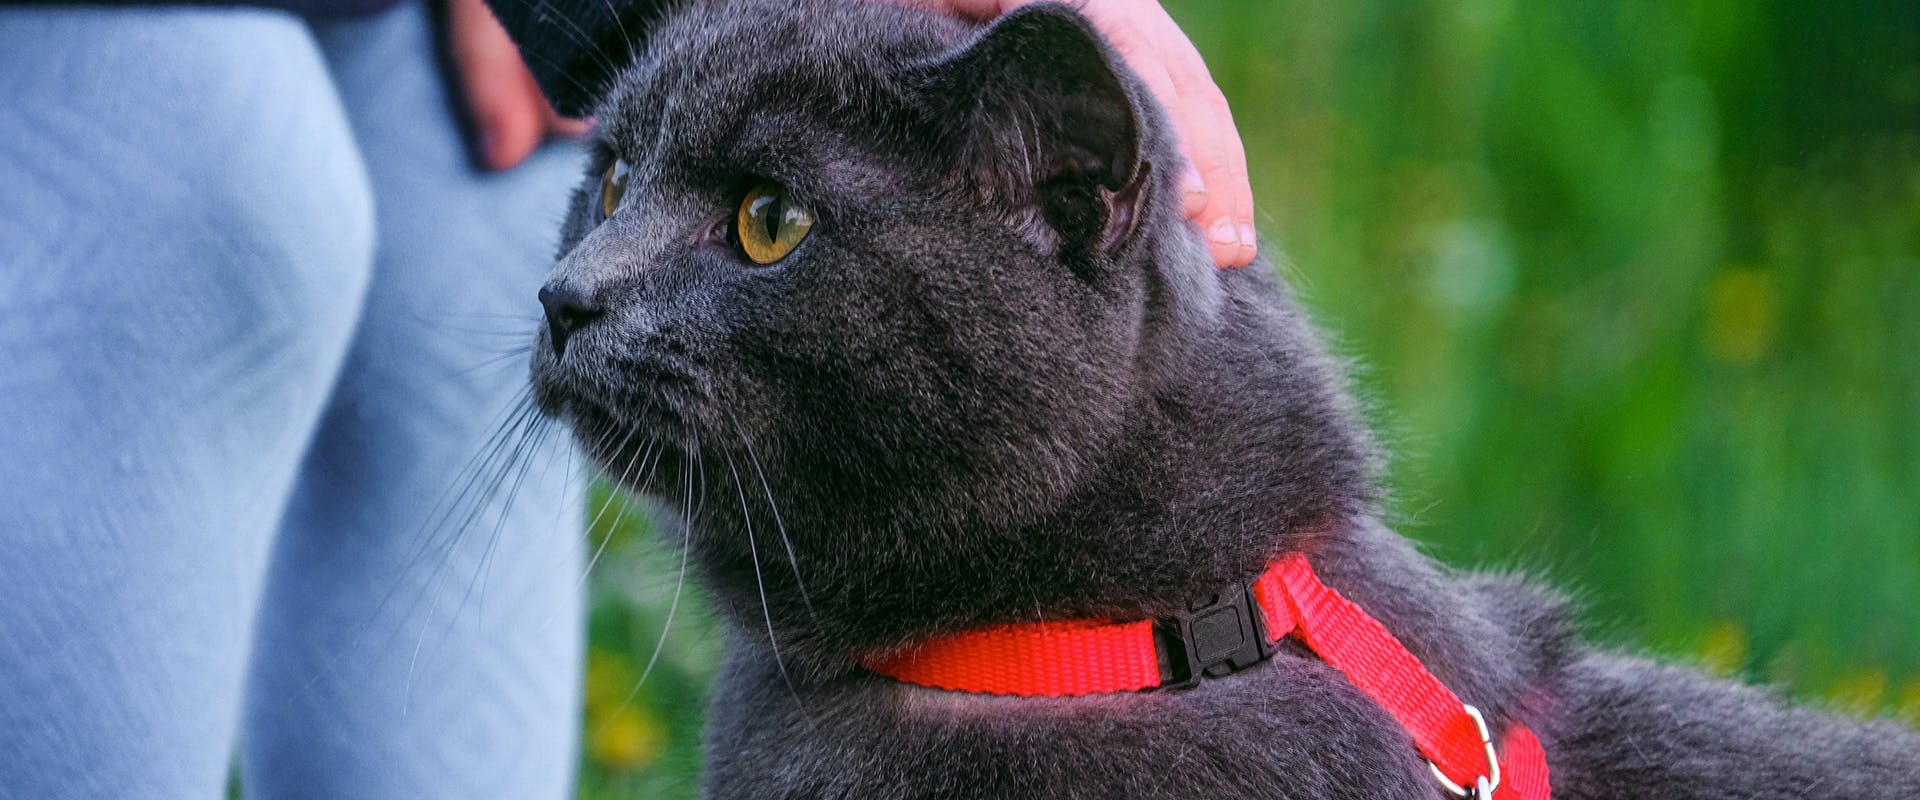 A fluffy grey cat wearing a bright red cat harness, a hand coming down from above to stroke its head